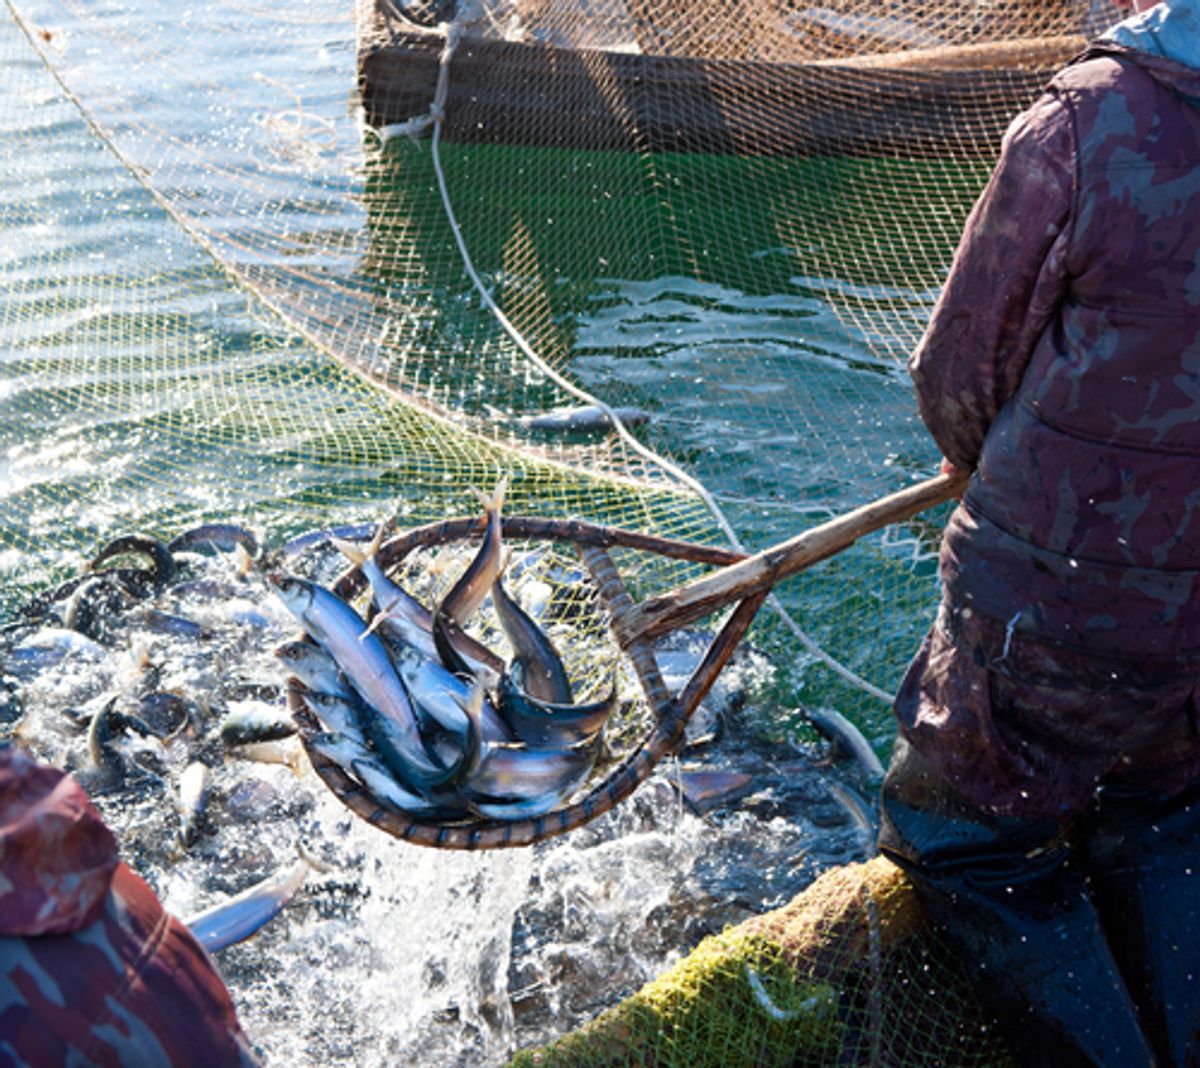 Report: Overfishing is still the norm